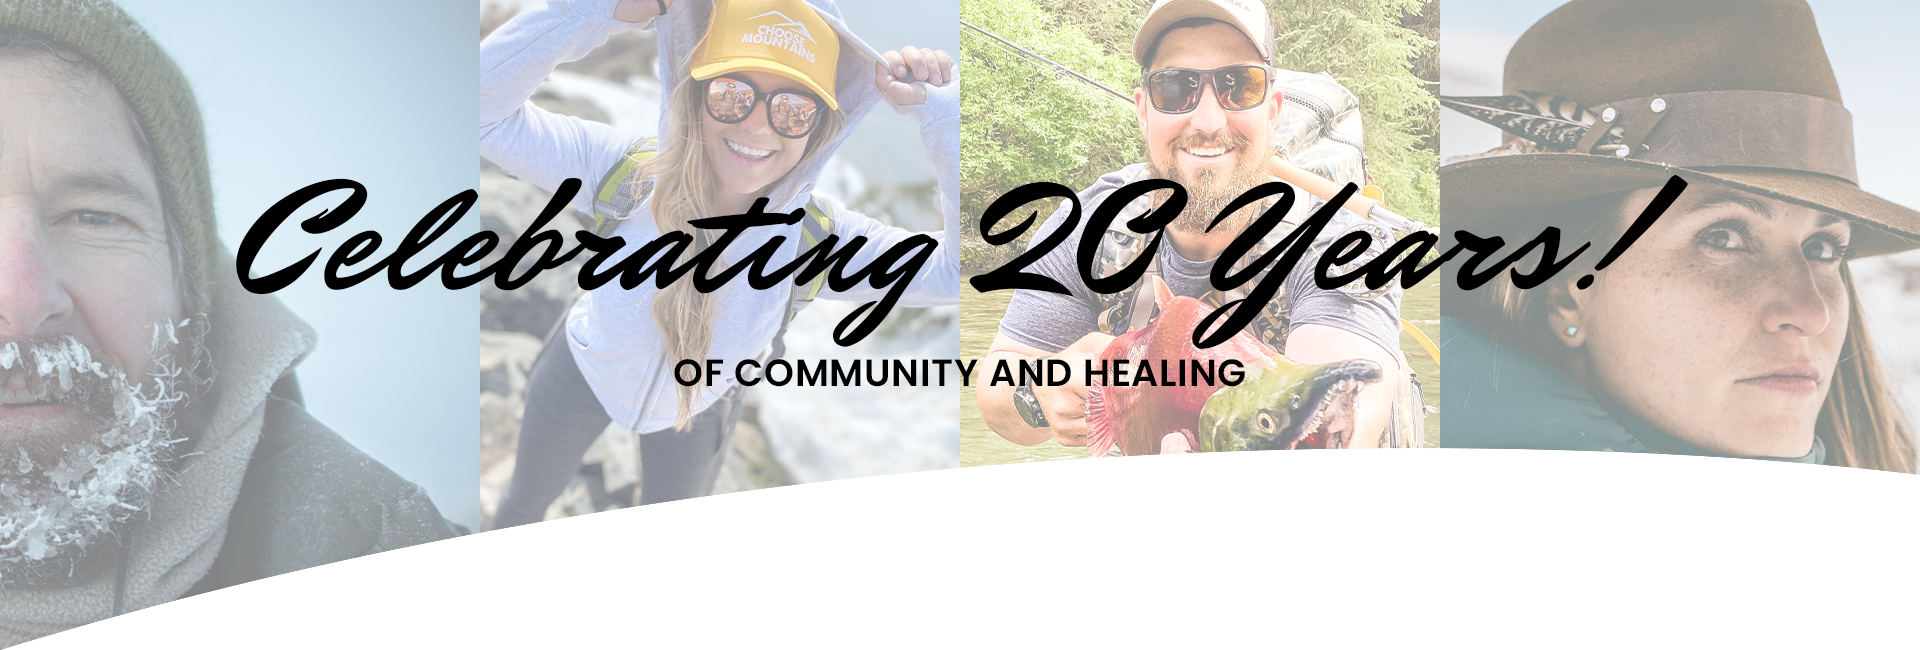 Celebrating 20 Years of Community and Healing